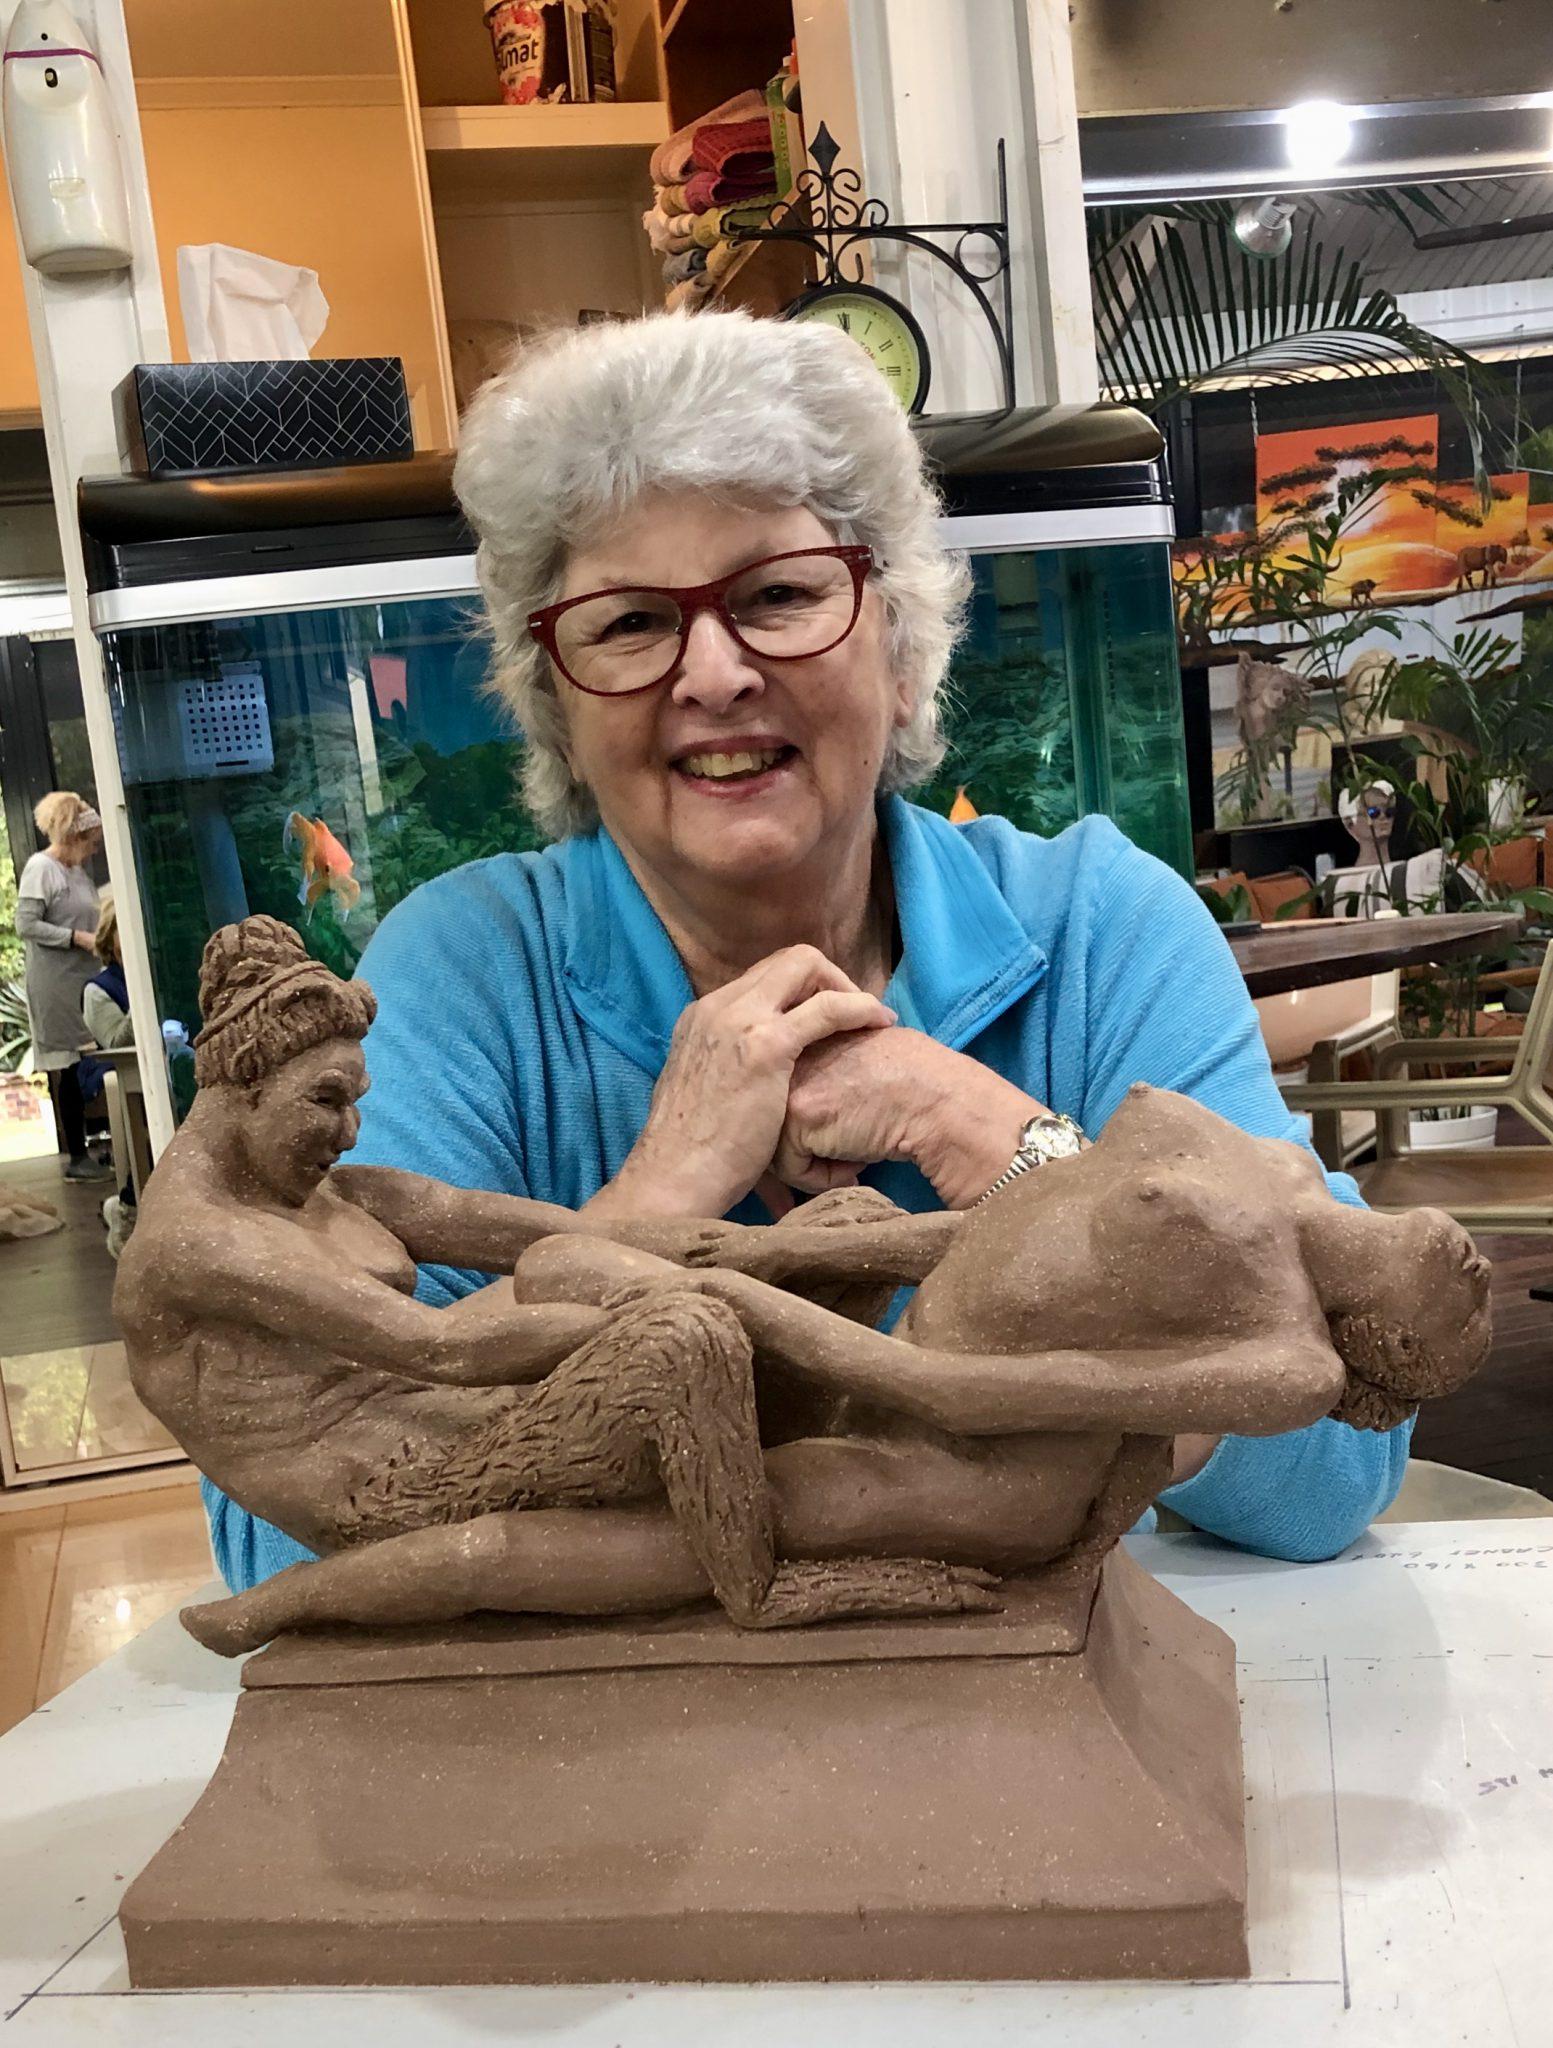 Completed her clay sculpture of a living tree at the art class - Georgettes  Art